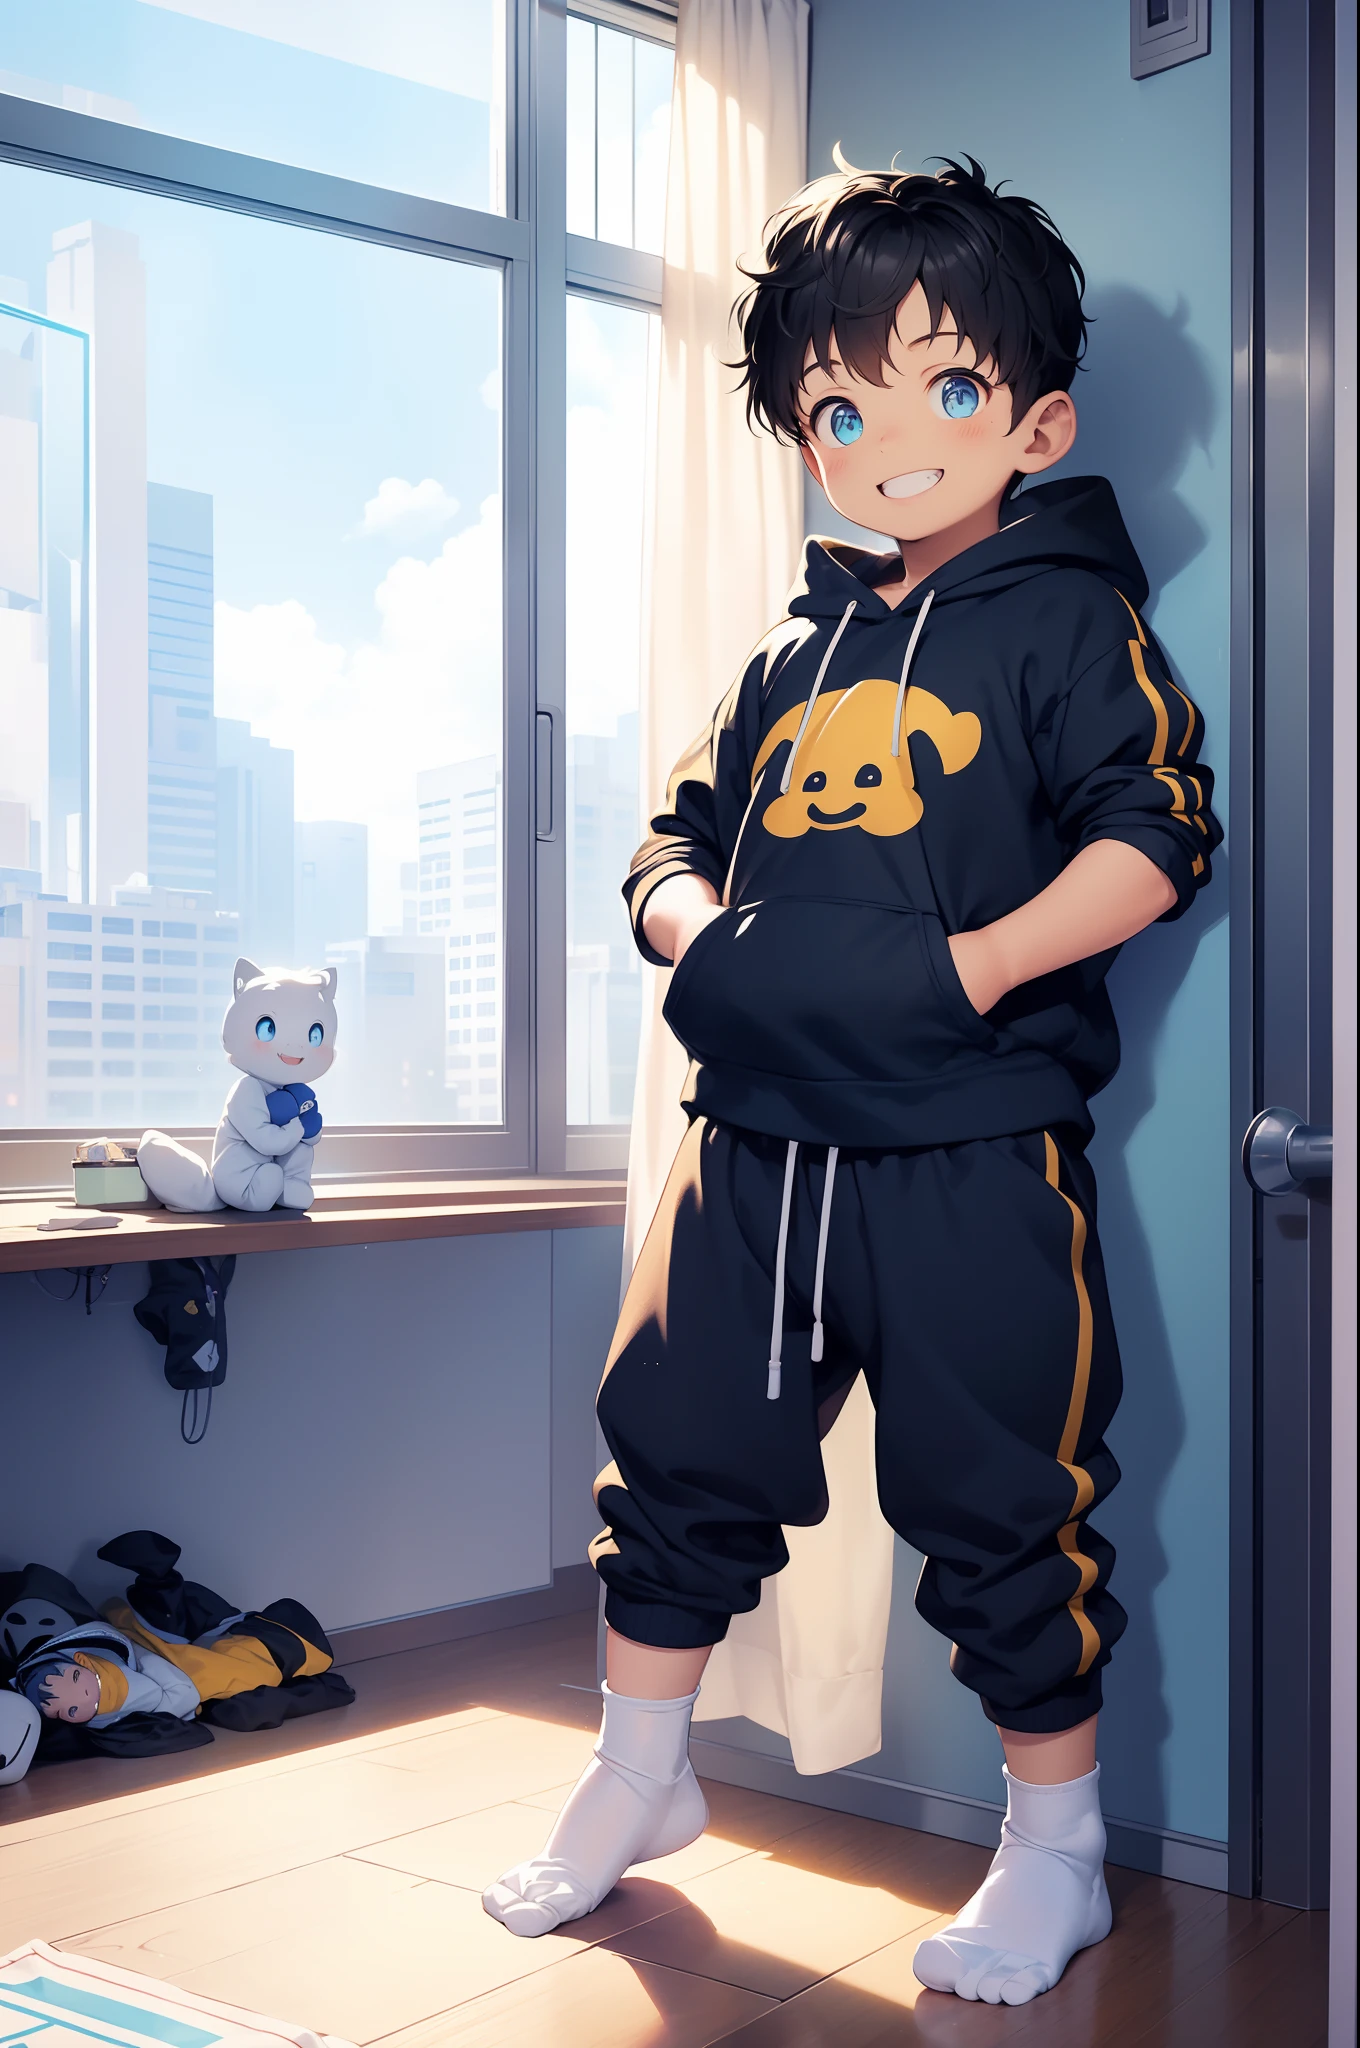 Masterpiece, chubby Little boy with blue hair and shiny bright gold colored eyes and small socks wearing a hoodie, and oversized sweatpants sitting in a his room, raining outside window, young, boy, , small, toddler, soft light, (sweatpants:1.4), (undersized socks:1.4), (Boy:1.4), (Shota:1.4), (Young:1.4), (Male:1.4), (smiling:1.4), (foot:1.5), (cocky:1.4), (pastel:1.0), (colors:1.0), (cute colors:1.0),